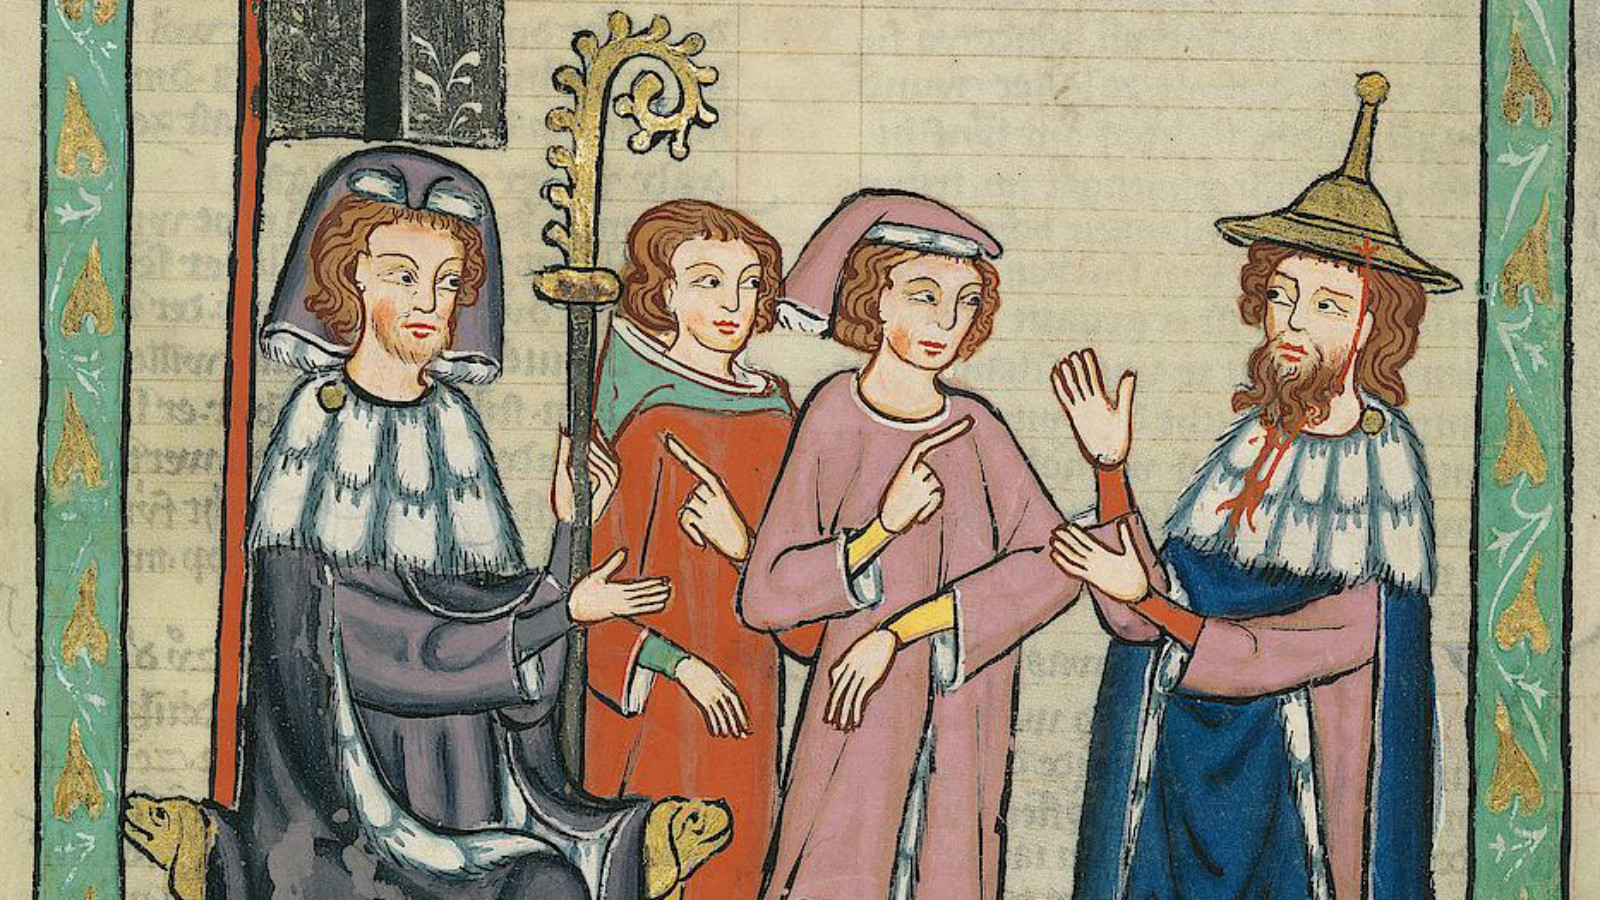 Jewish Clothing in the Middle Ages